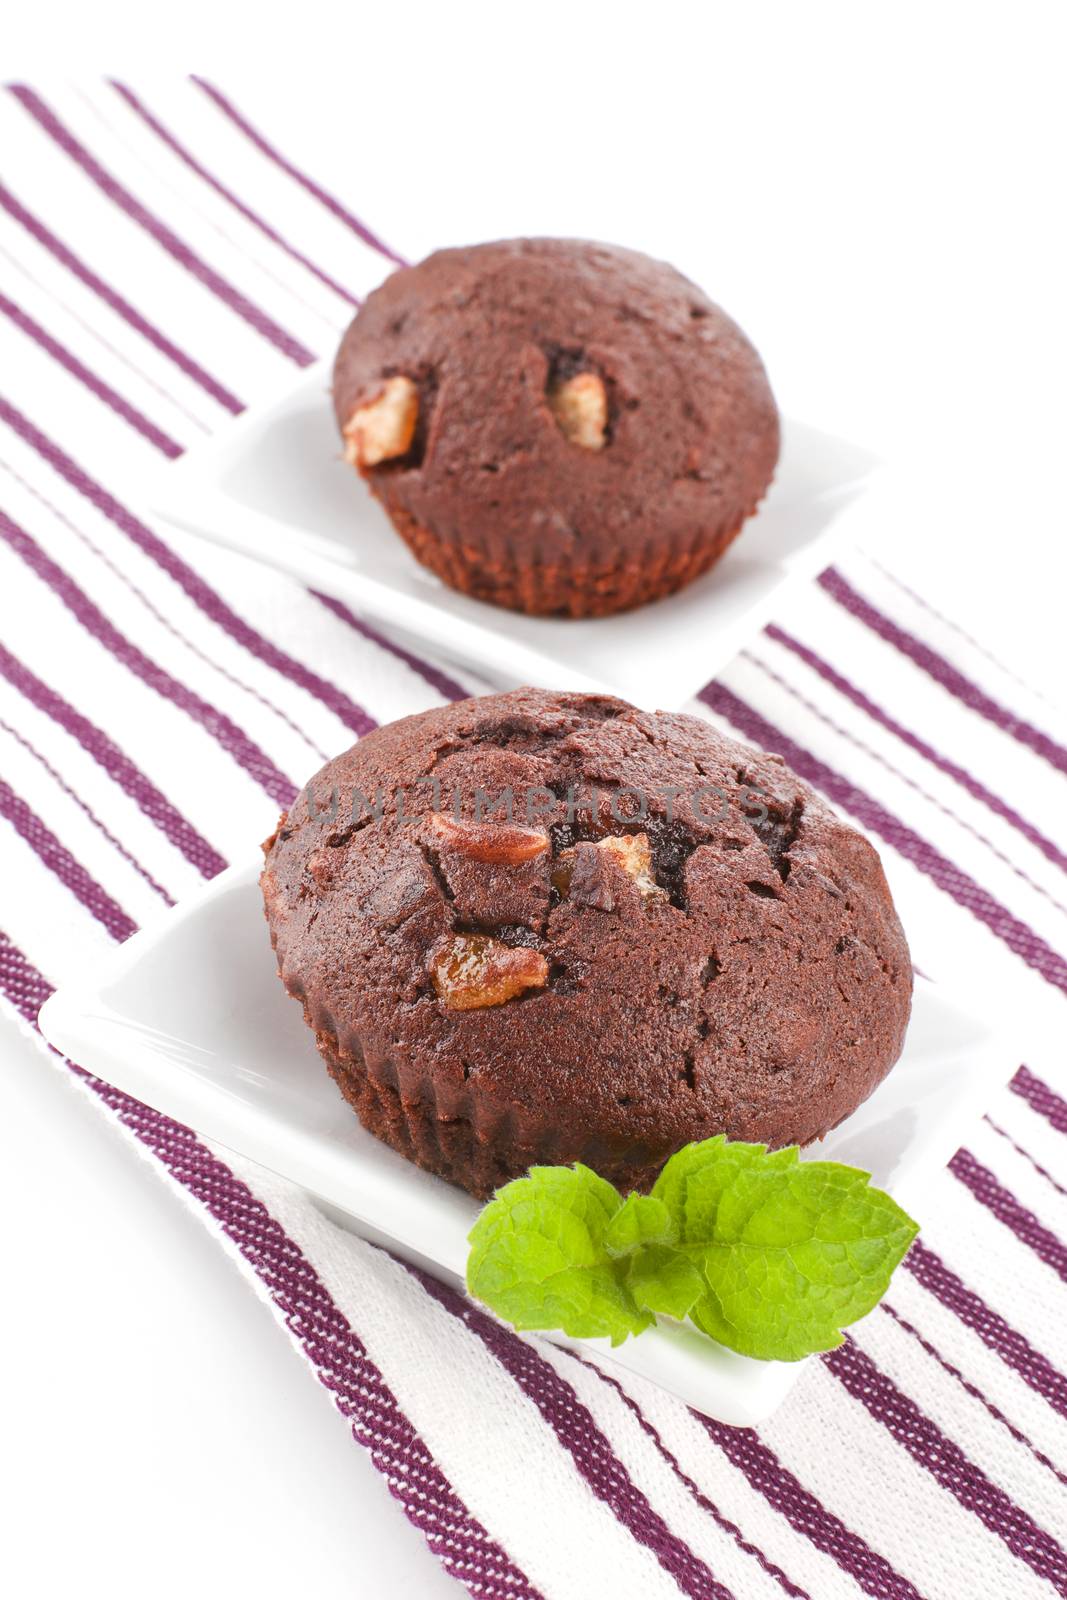 Luxurious chocolate muffins decorated with fresh mint leaf in white bowls. Culinary sweets.